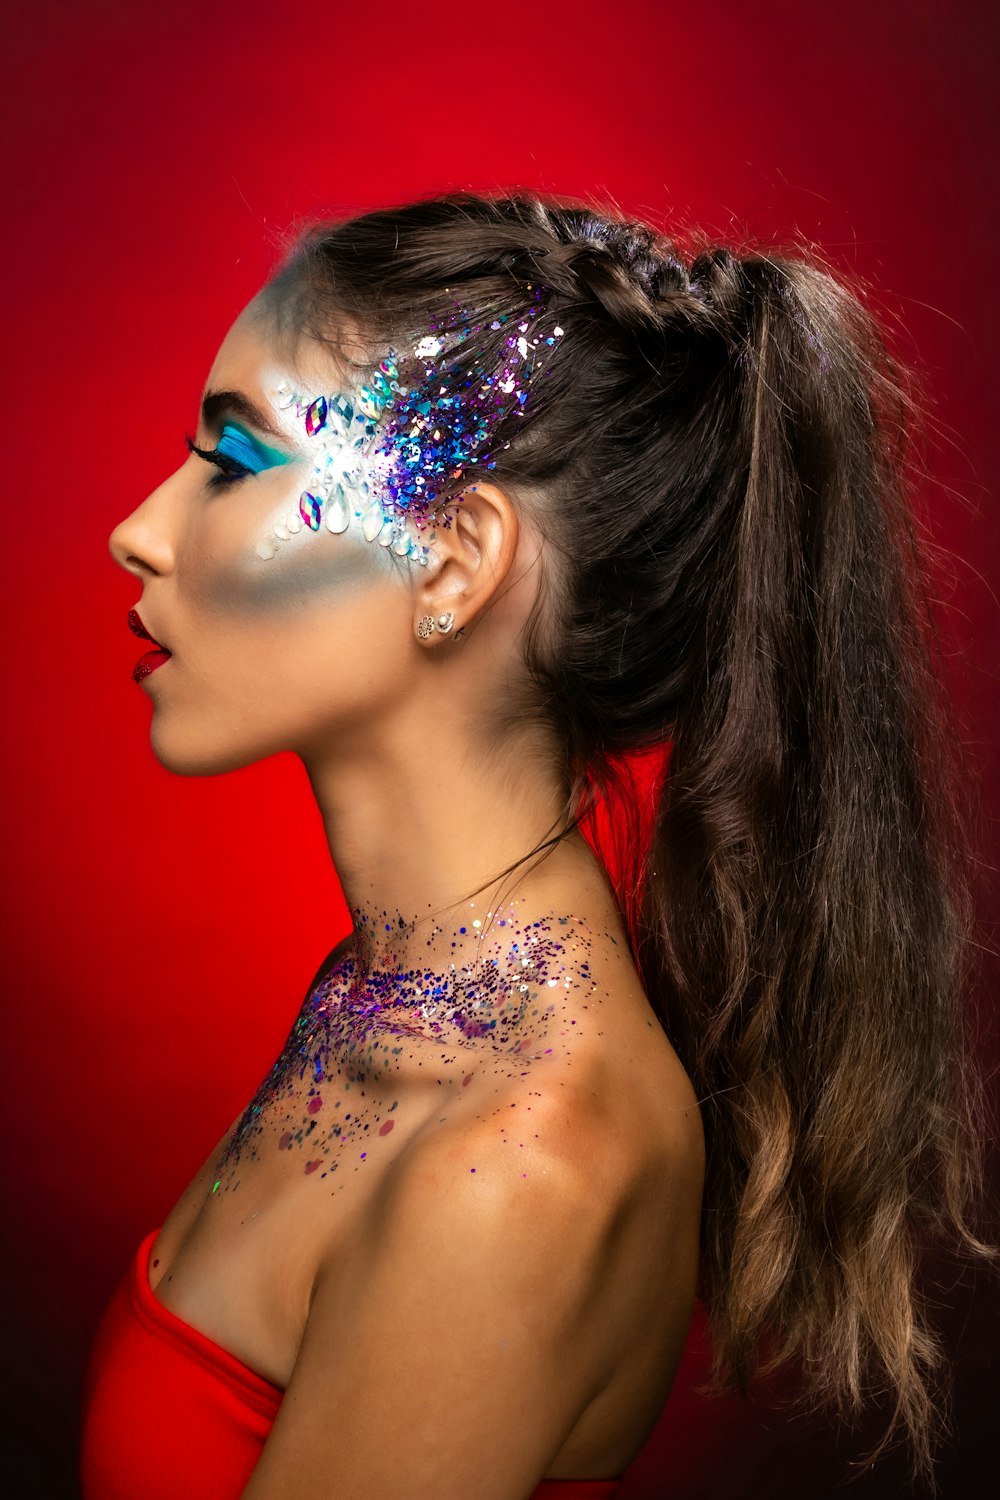 a woman with glitter on her face and neck